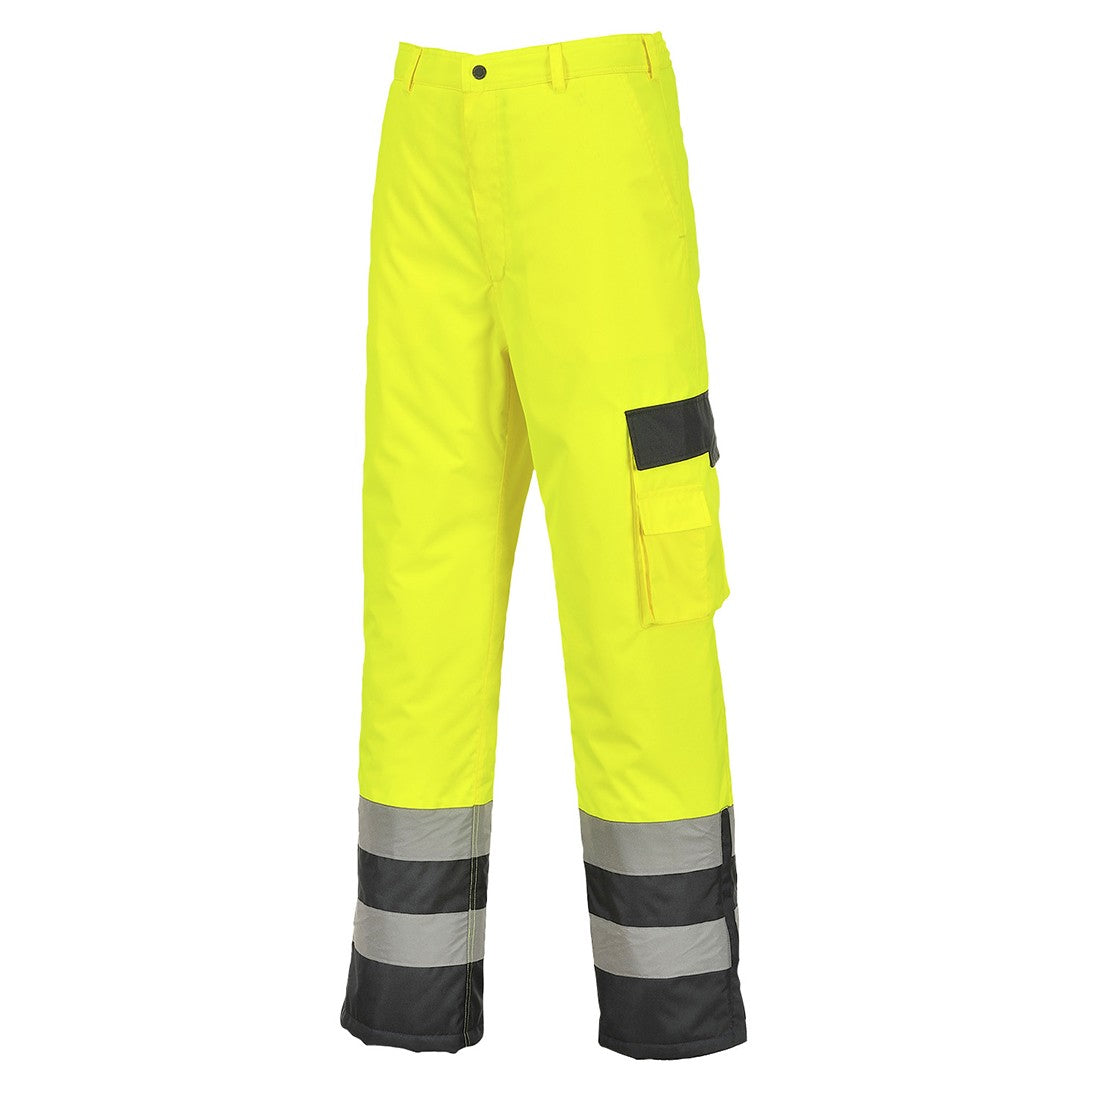 Hi Vis Contrast Pants Lined for Men and Women -  Waterproof Work Wear - Safety Ansi Class 2, High Visibility (HiVis Yellow/Navy)